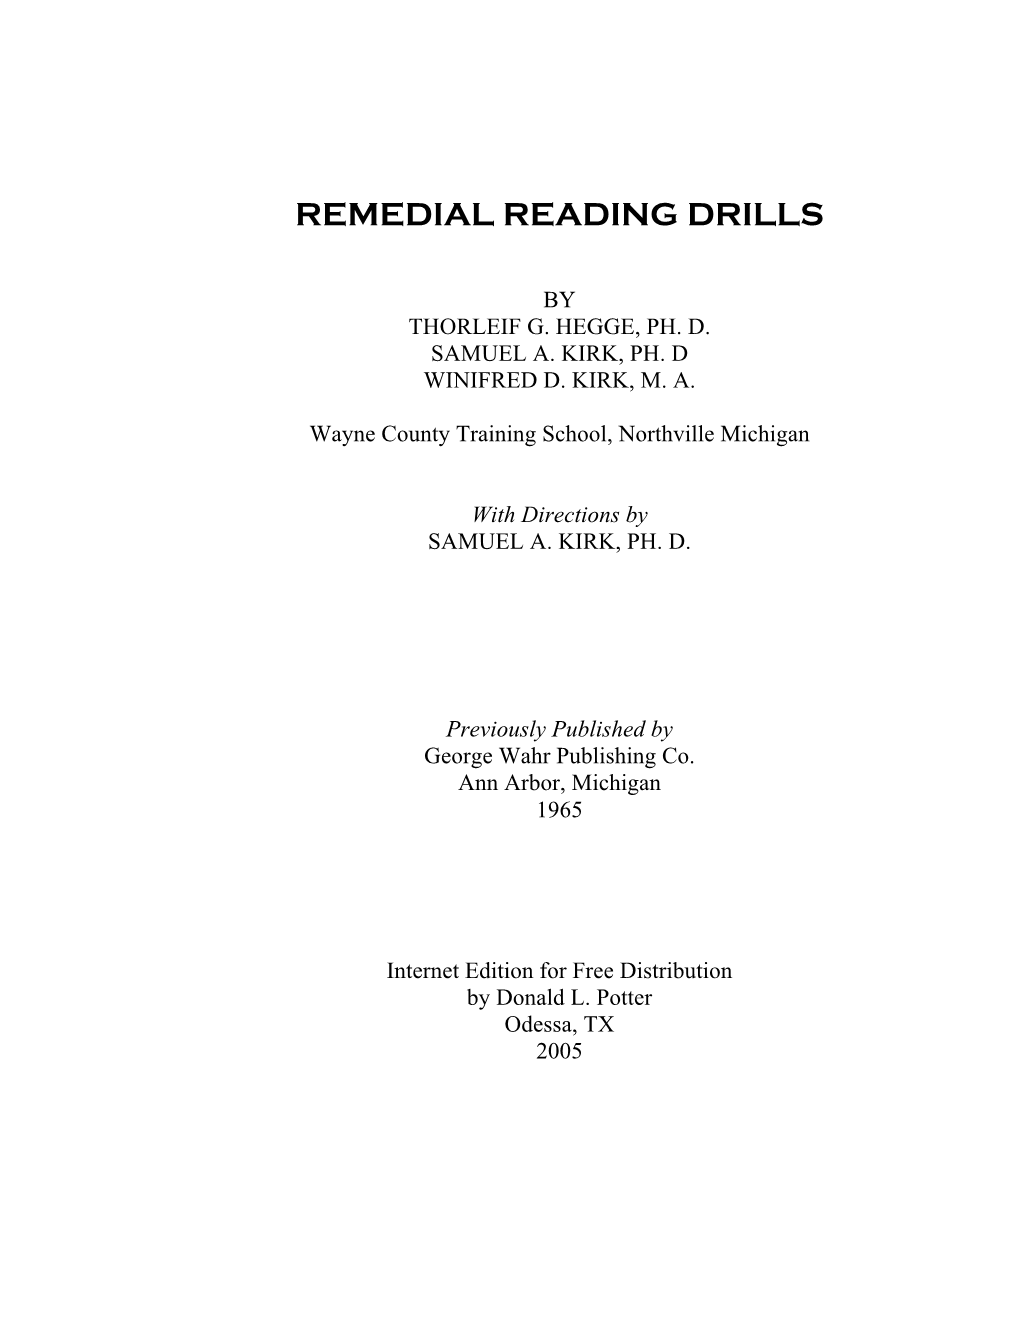 Remedial Reading Drills